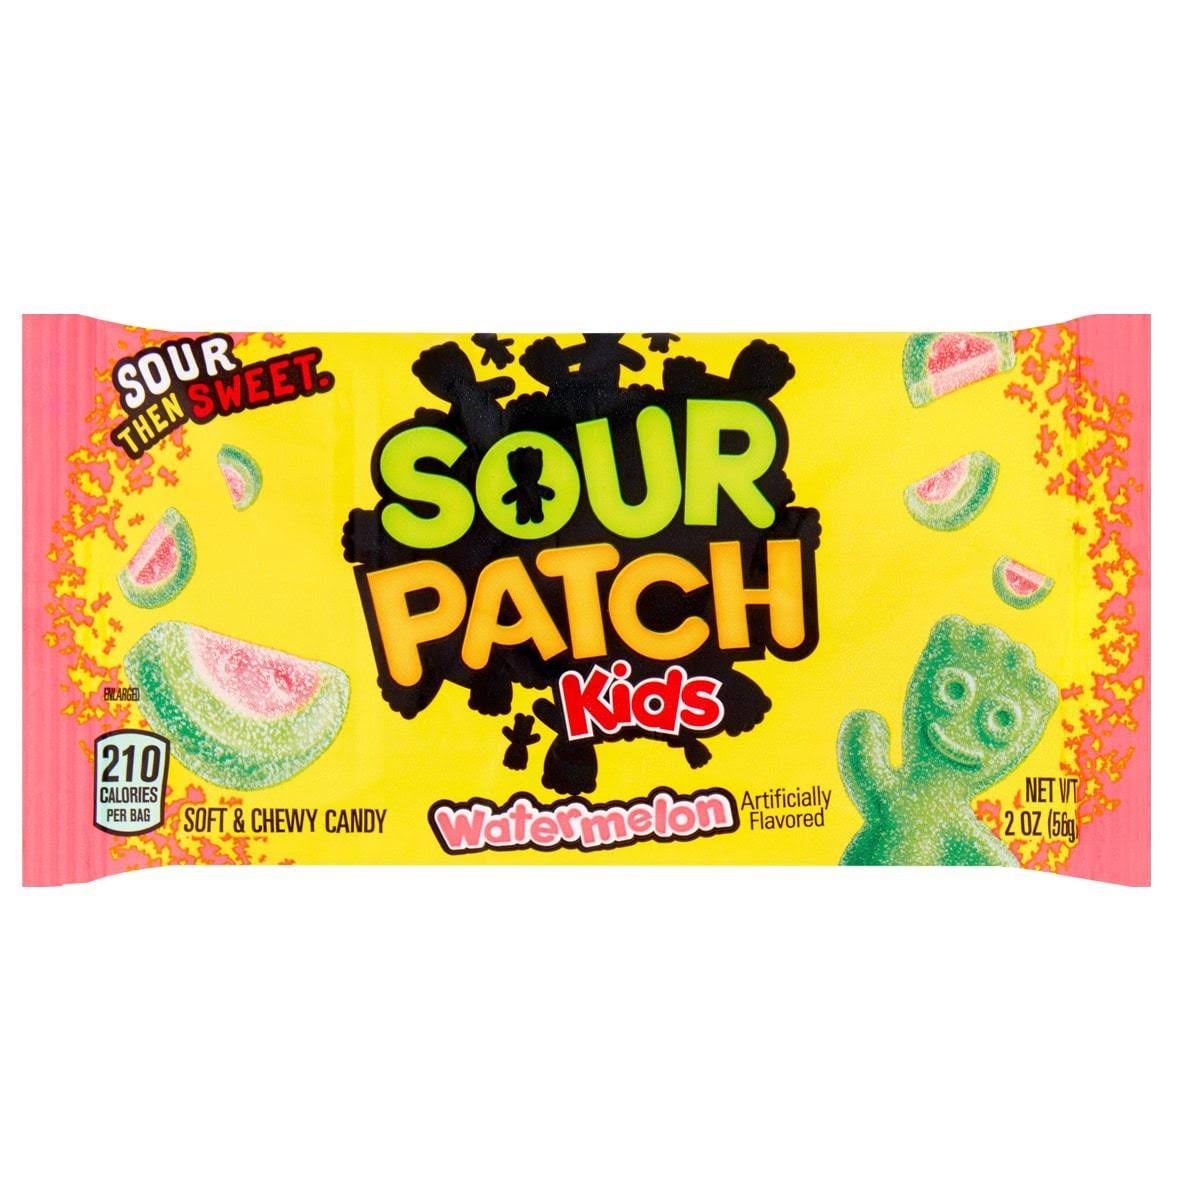 Sour then Sweet Sour Patch Watermelon Soft and Chewy Candy - 56g